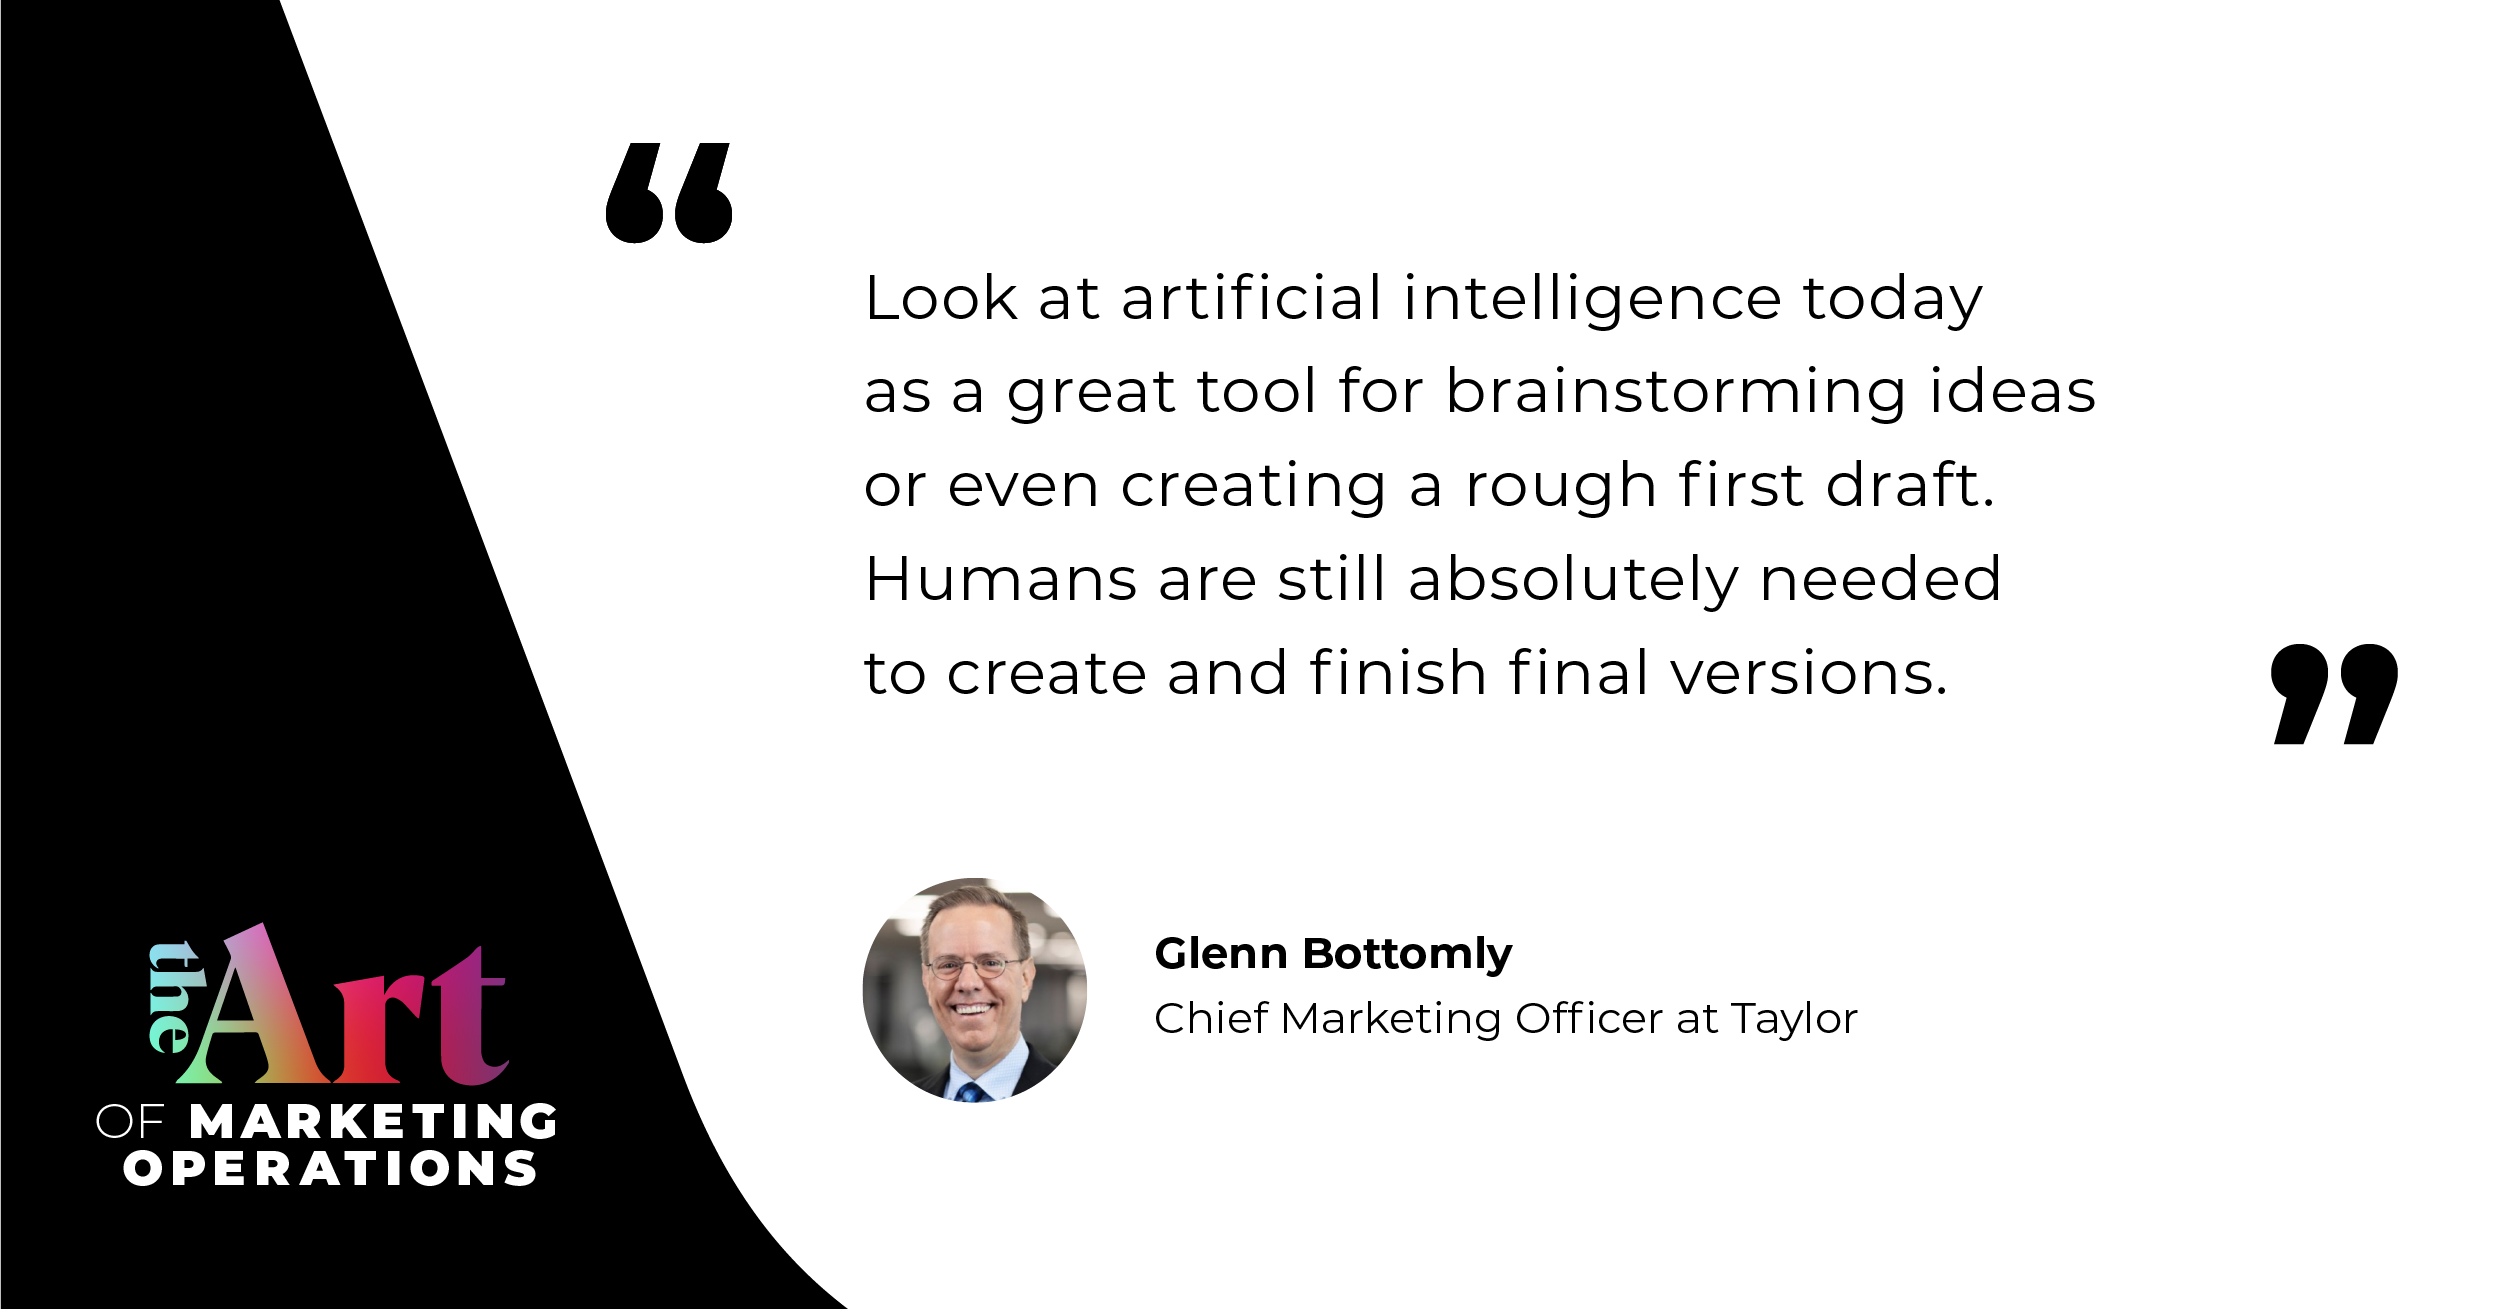 “Look at artificial intelligence today as being a great tool for brainstorming ideas or creating a rough first draft. Humans are still absolutely needed to create and finish final versions.”  — Glenn Bottomly